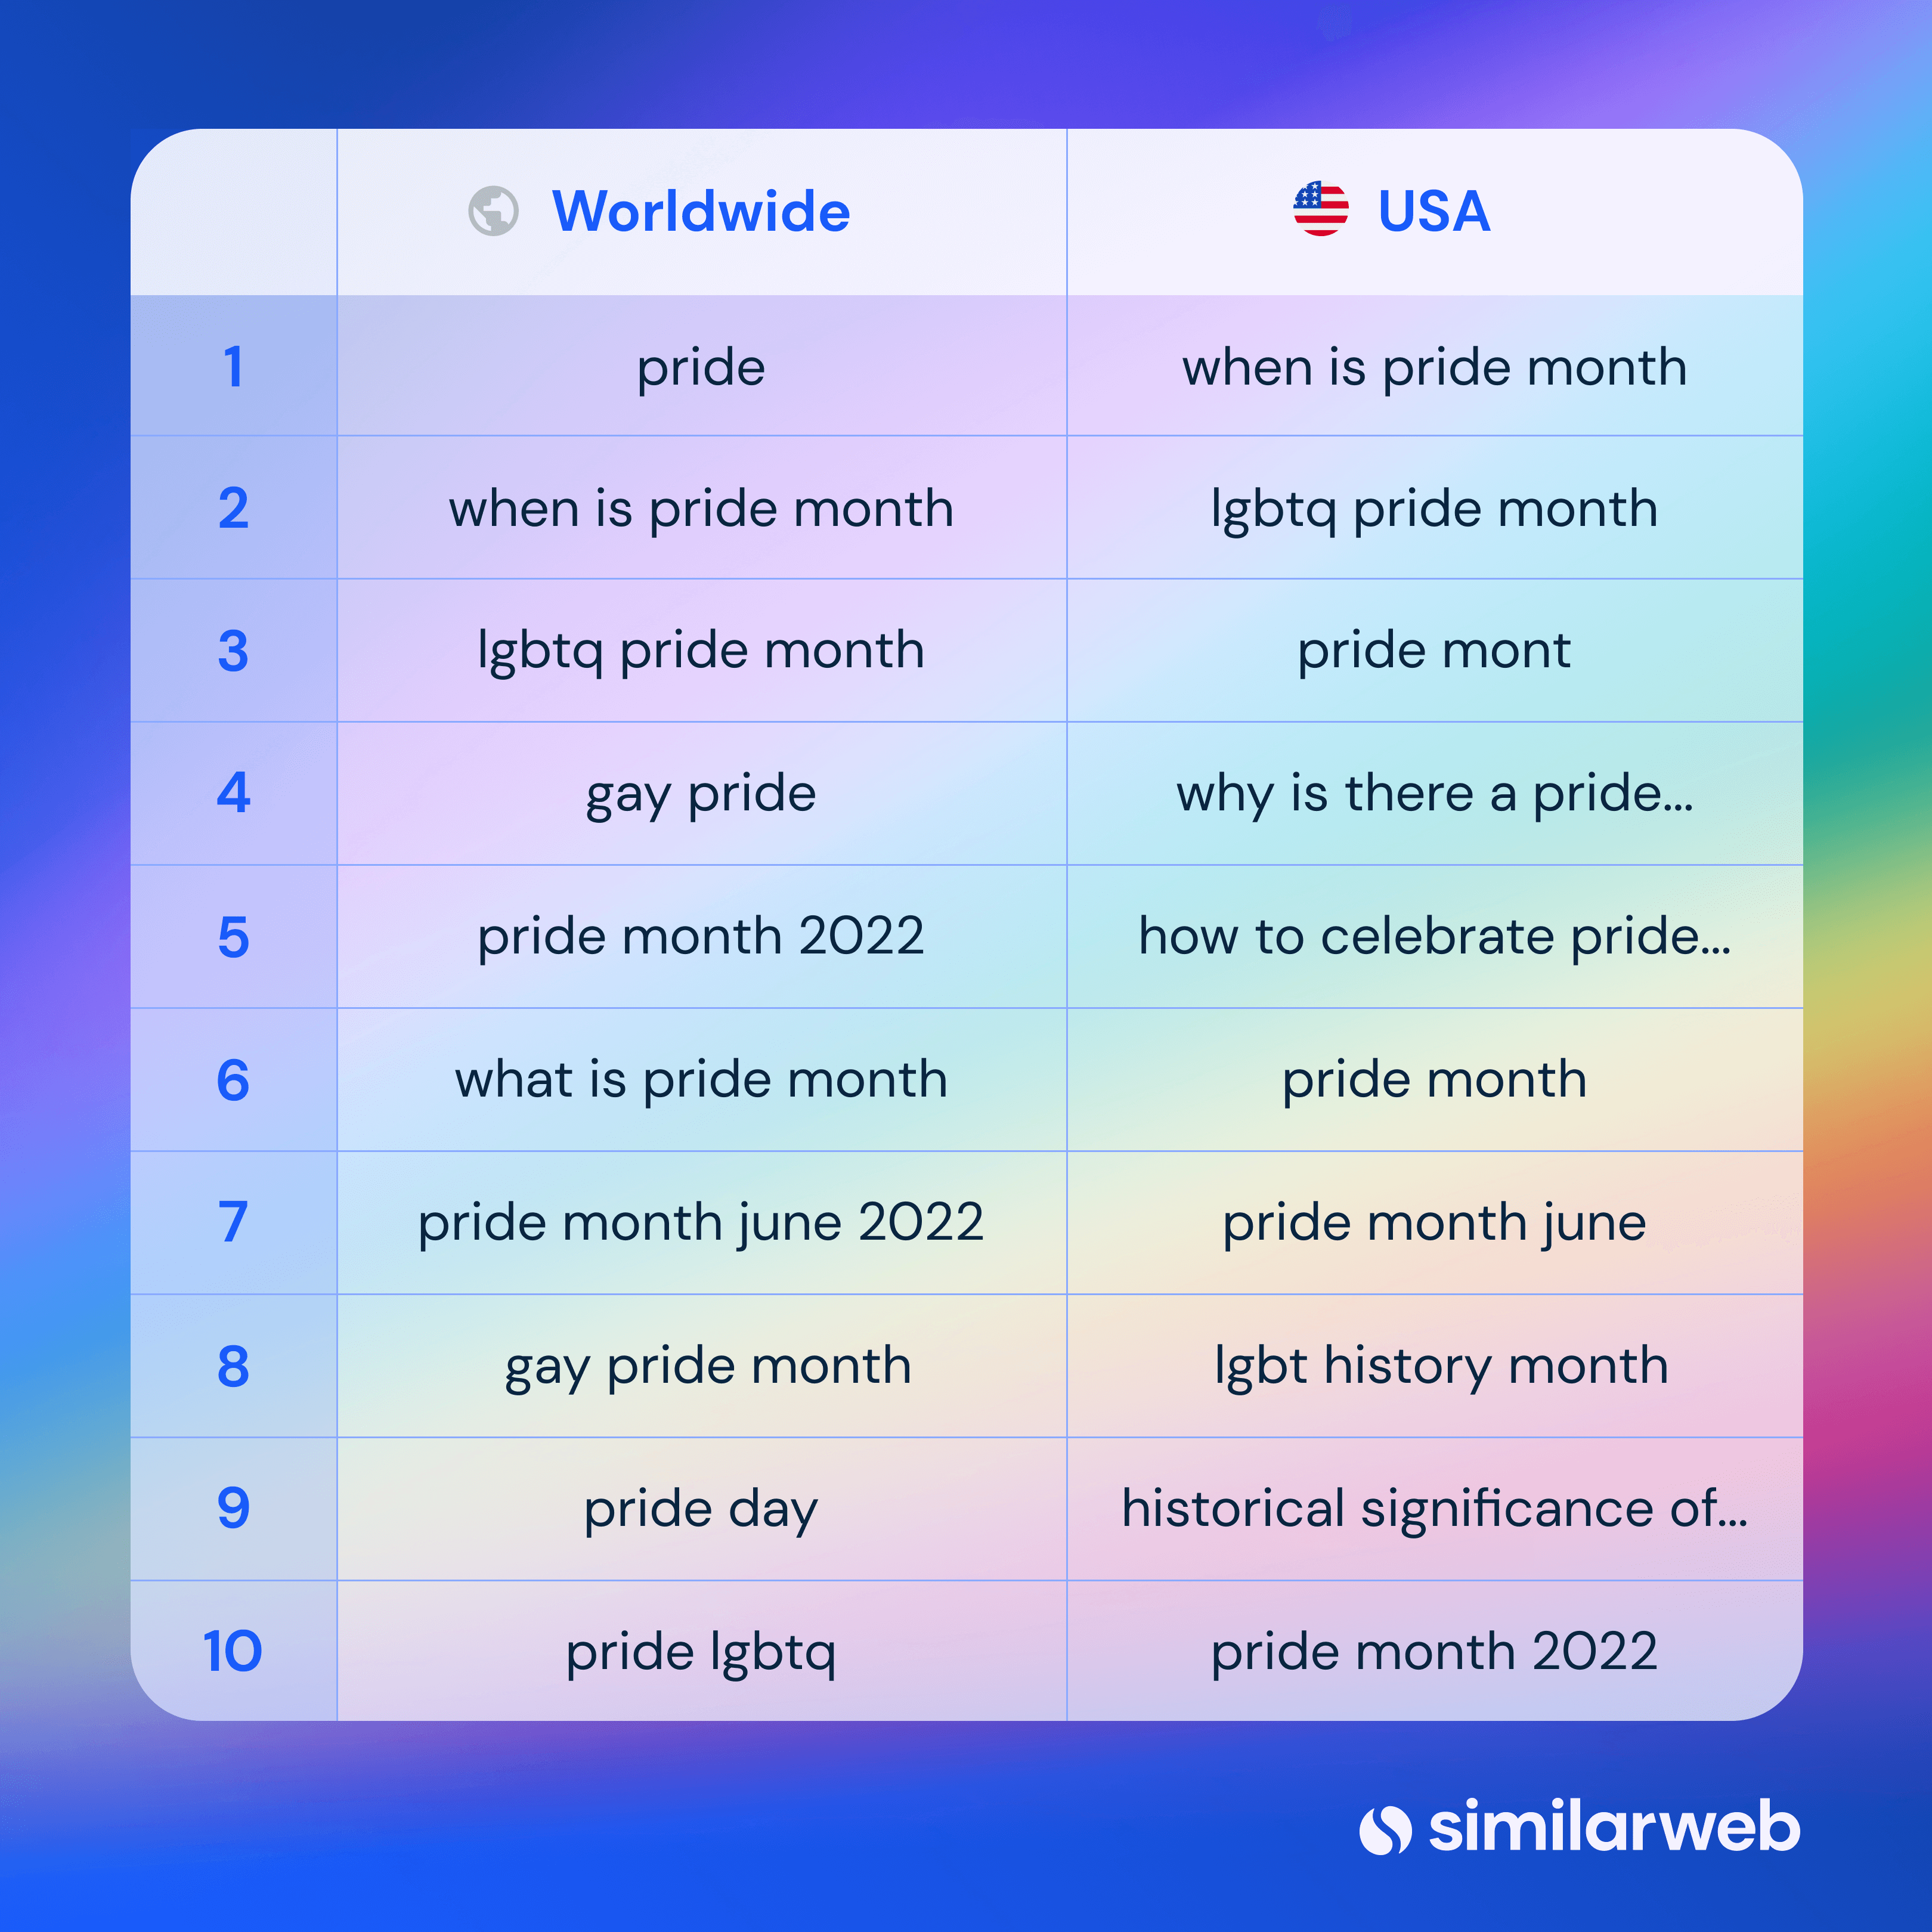 Top 10 pride related search terms in the world vs in the US